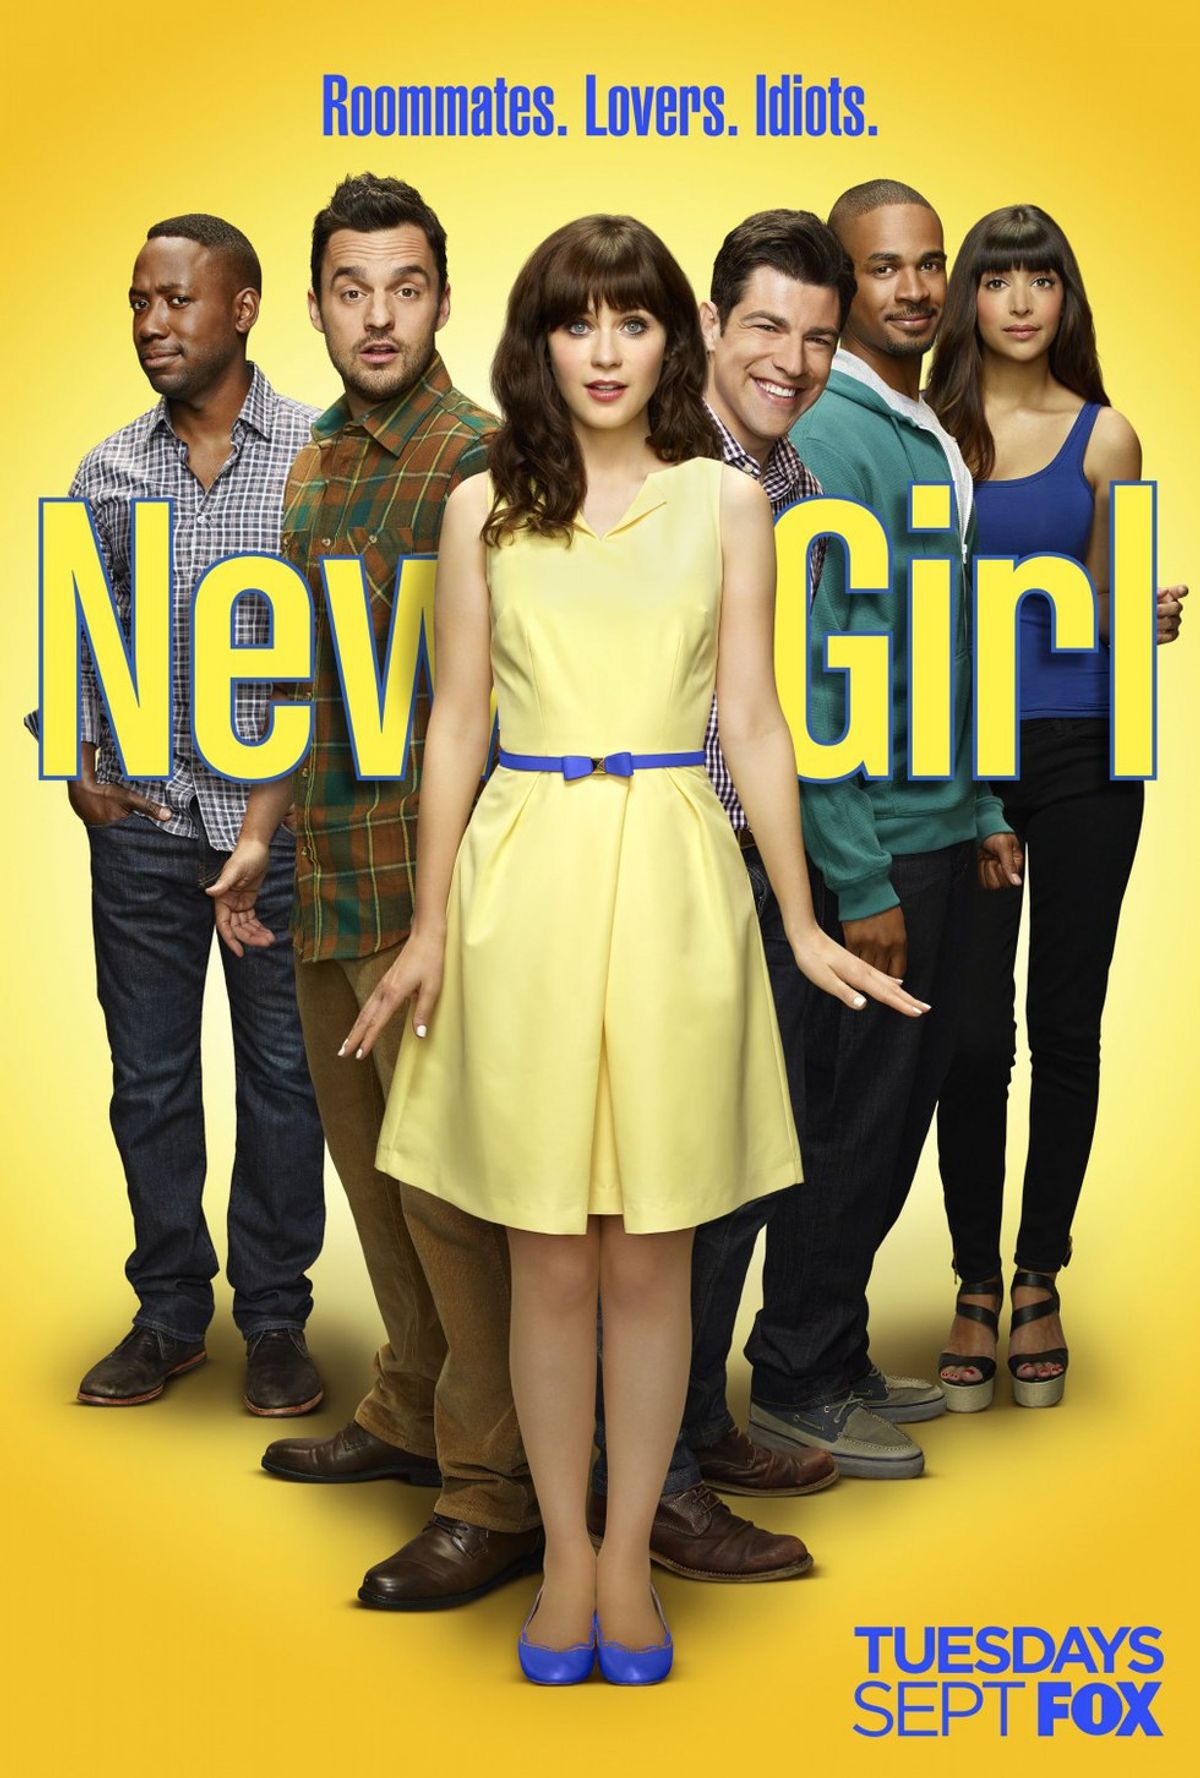 11 New Girl Quotes That Sum Up Your 20's